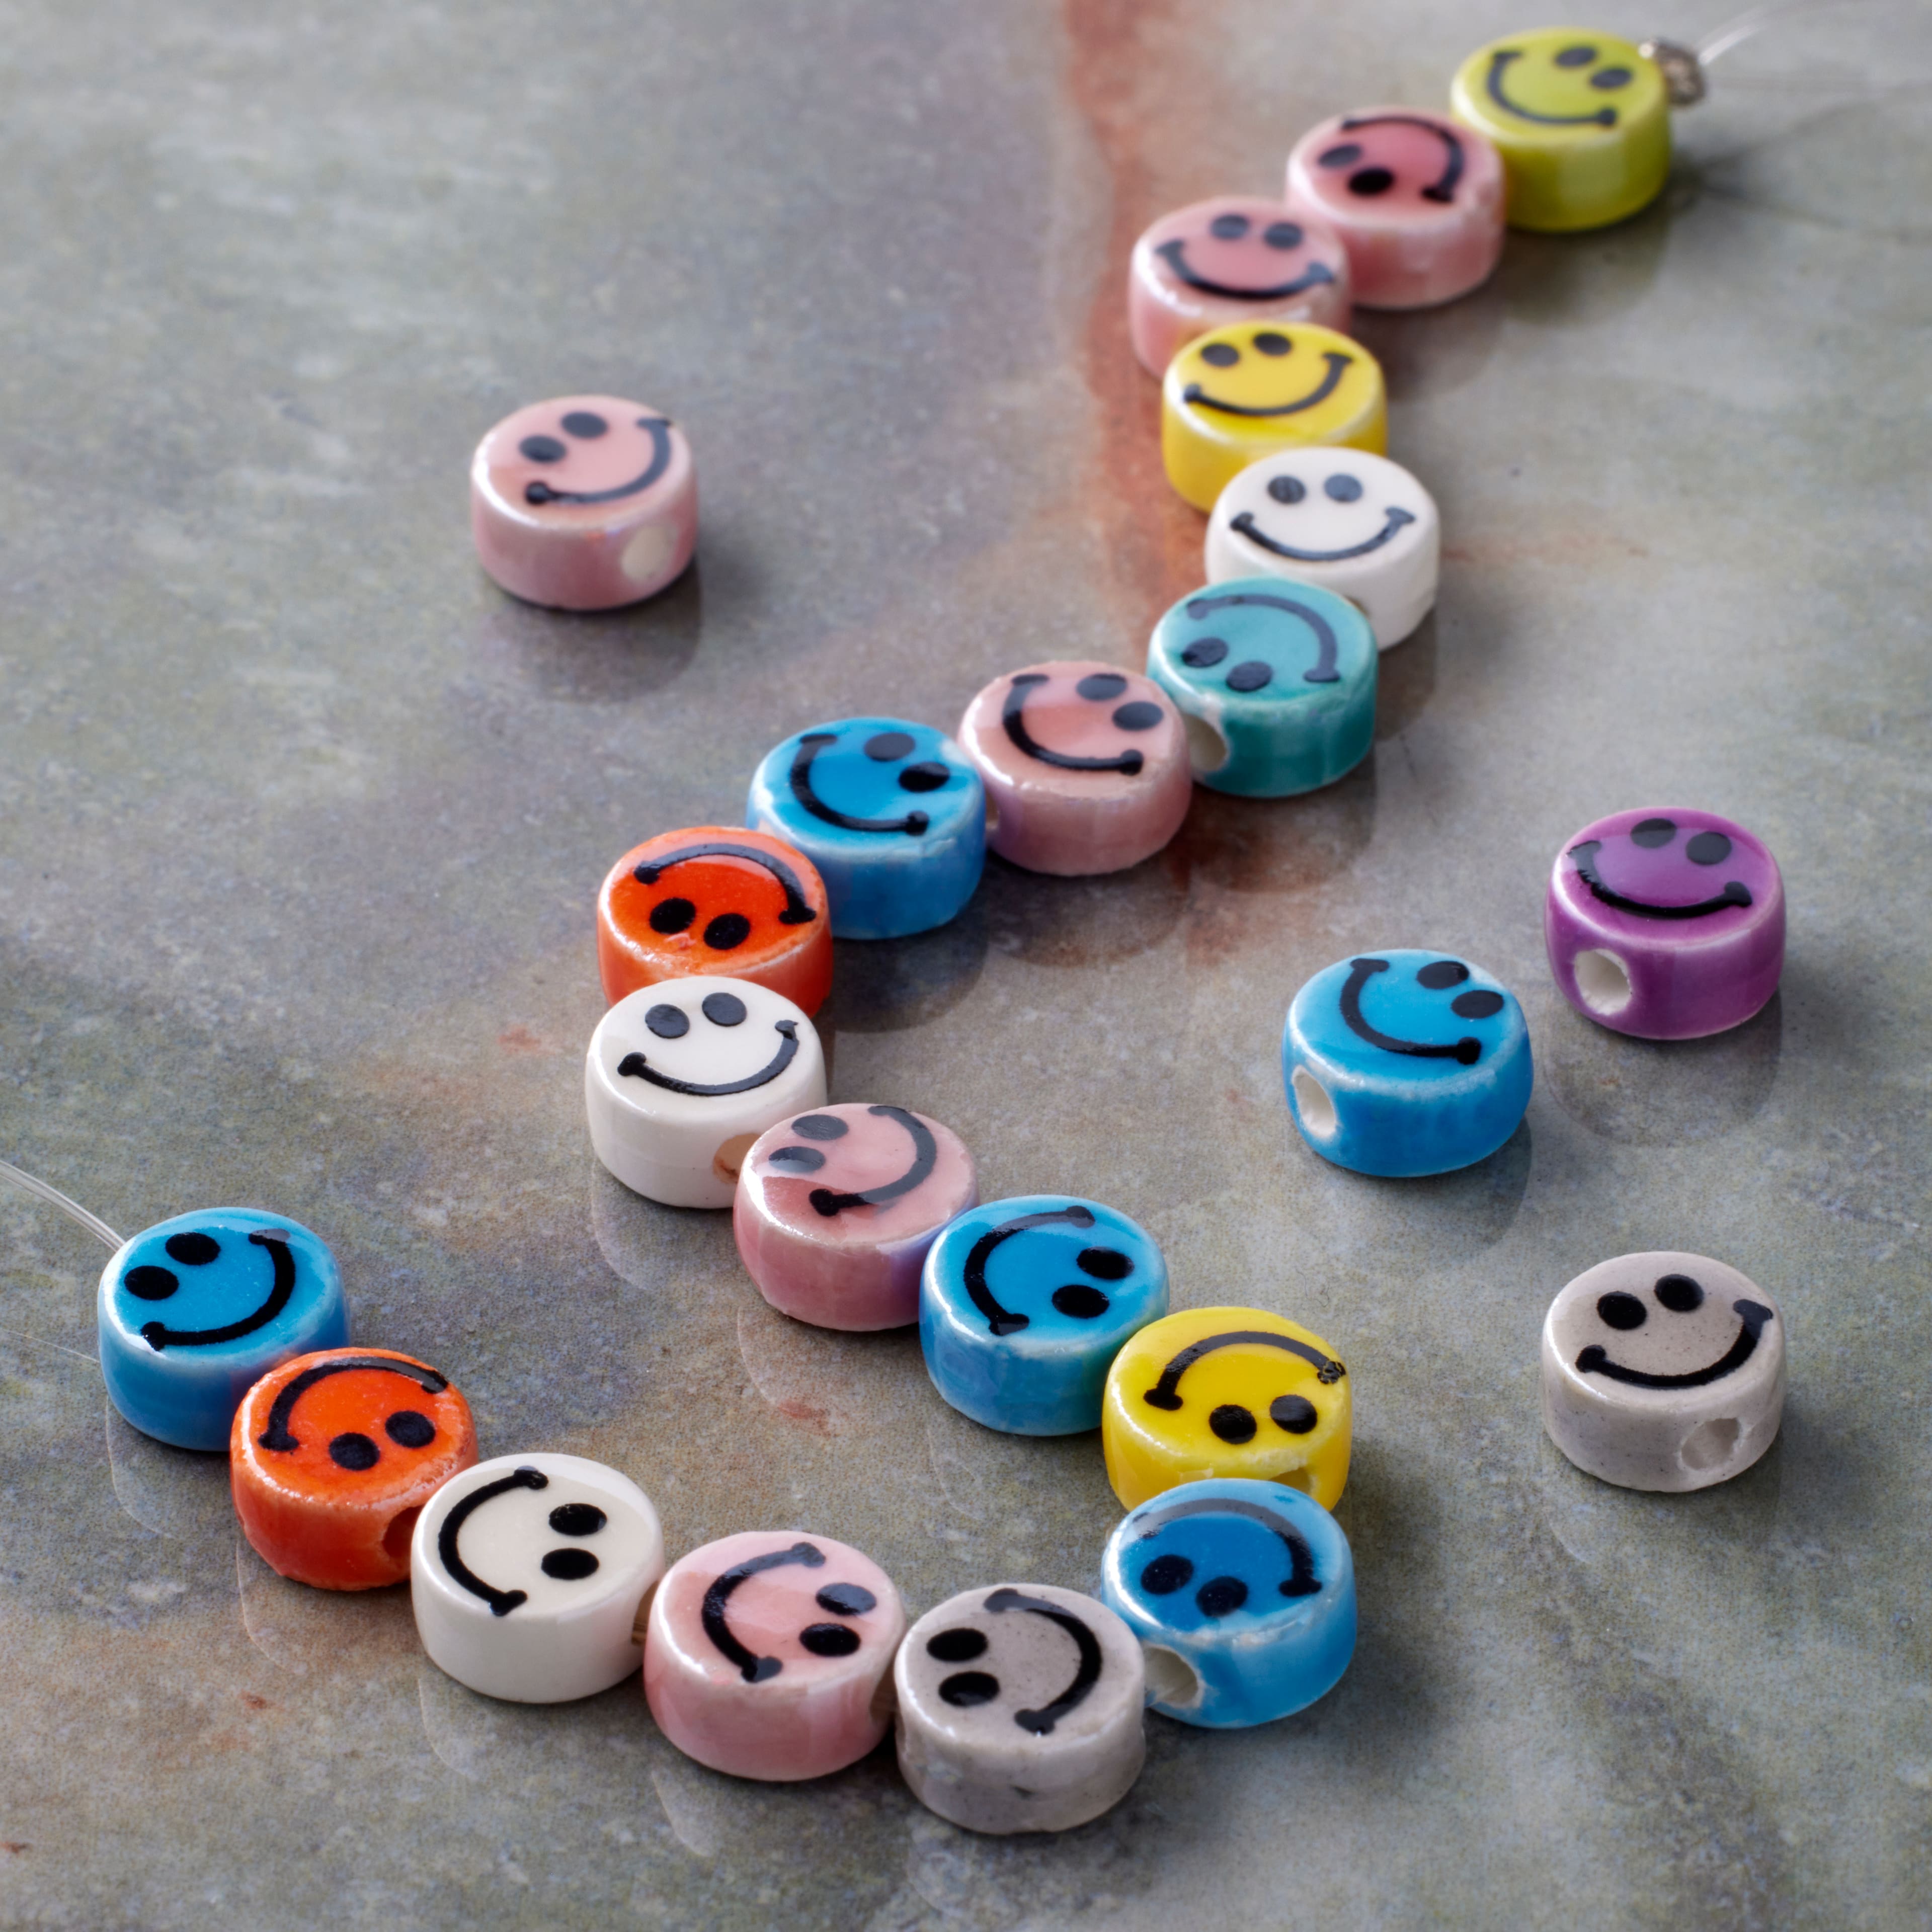 Multicolor Ceramic Smiley Face Beads, 7.5mm by Bead Landing